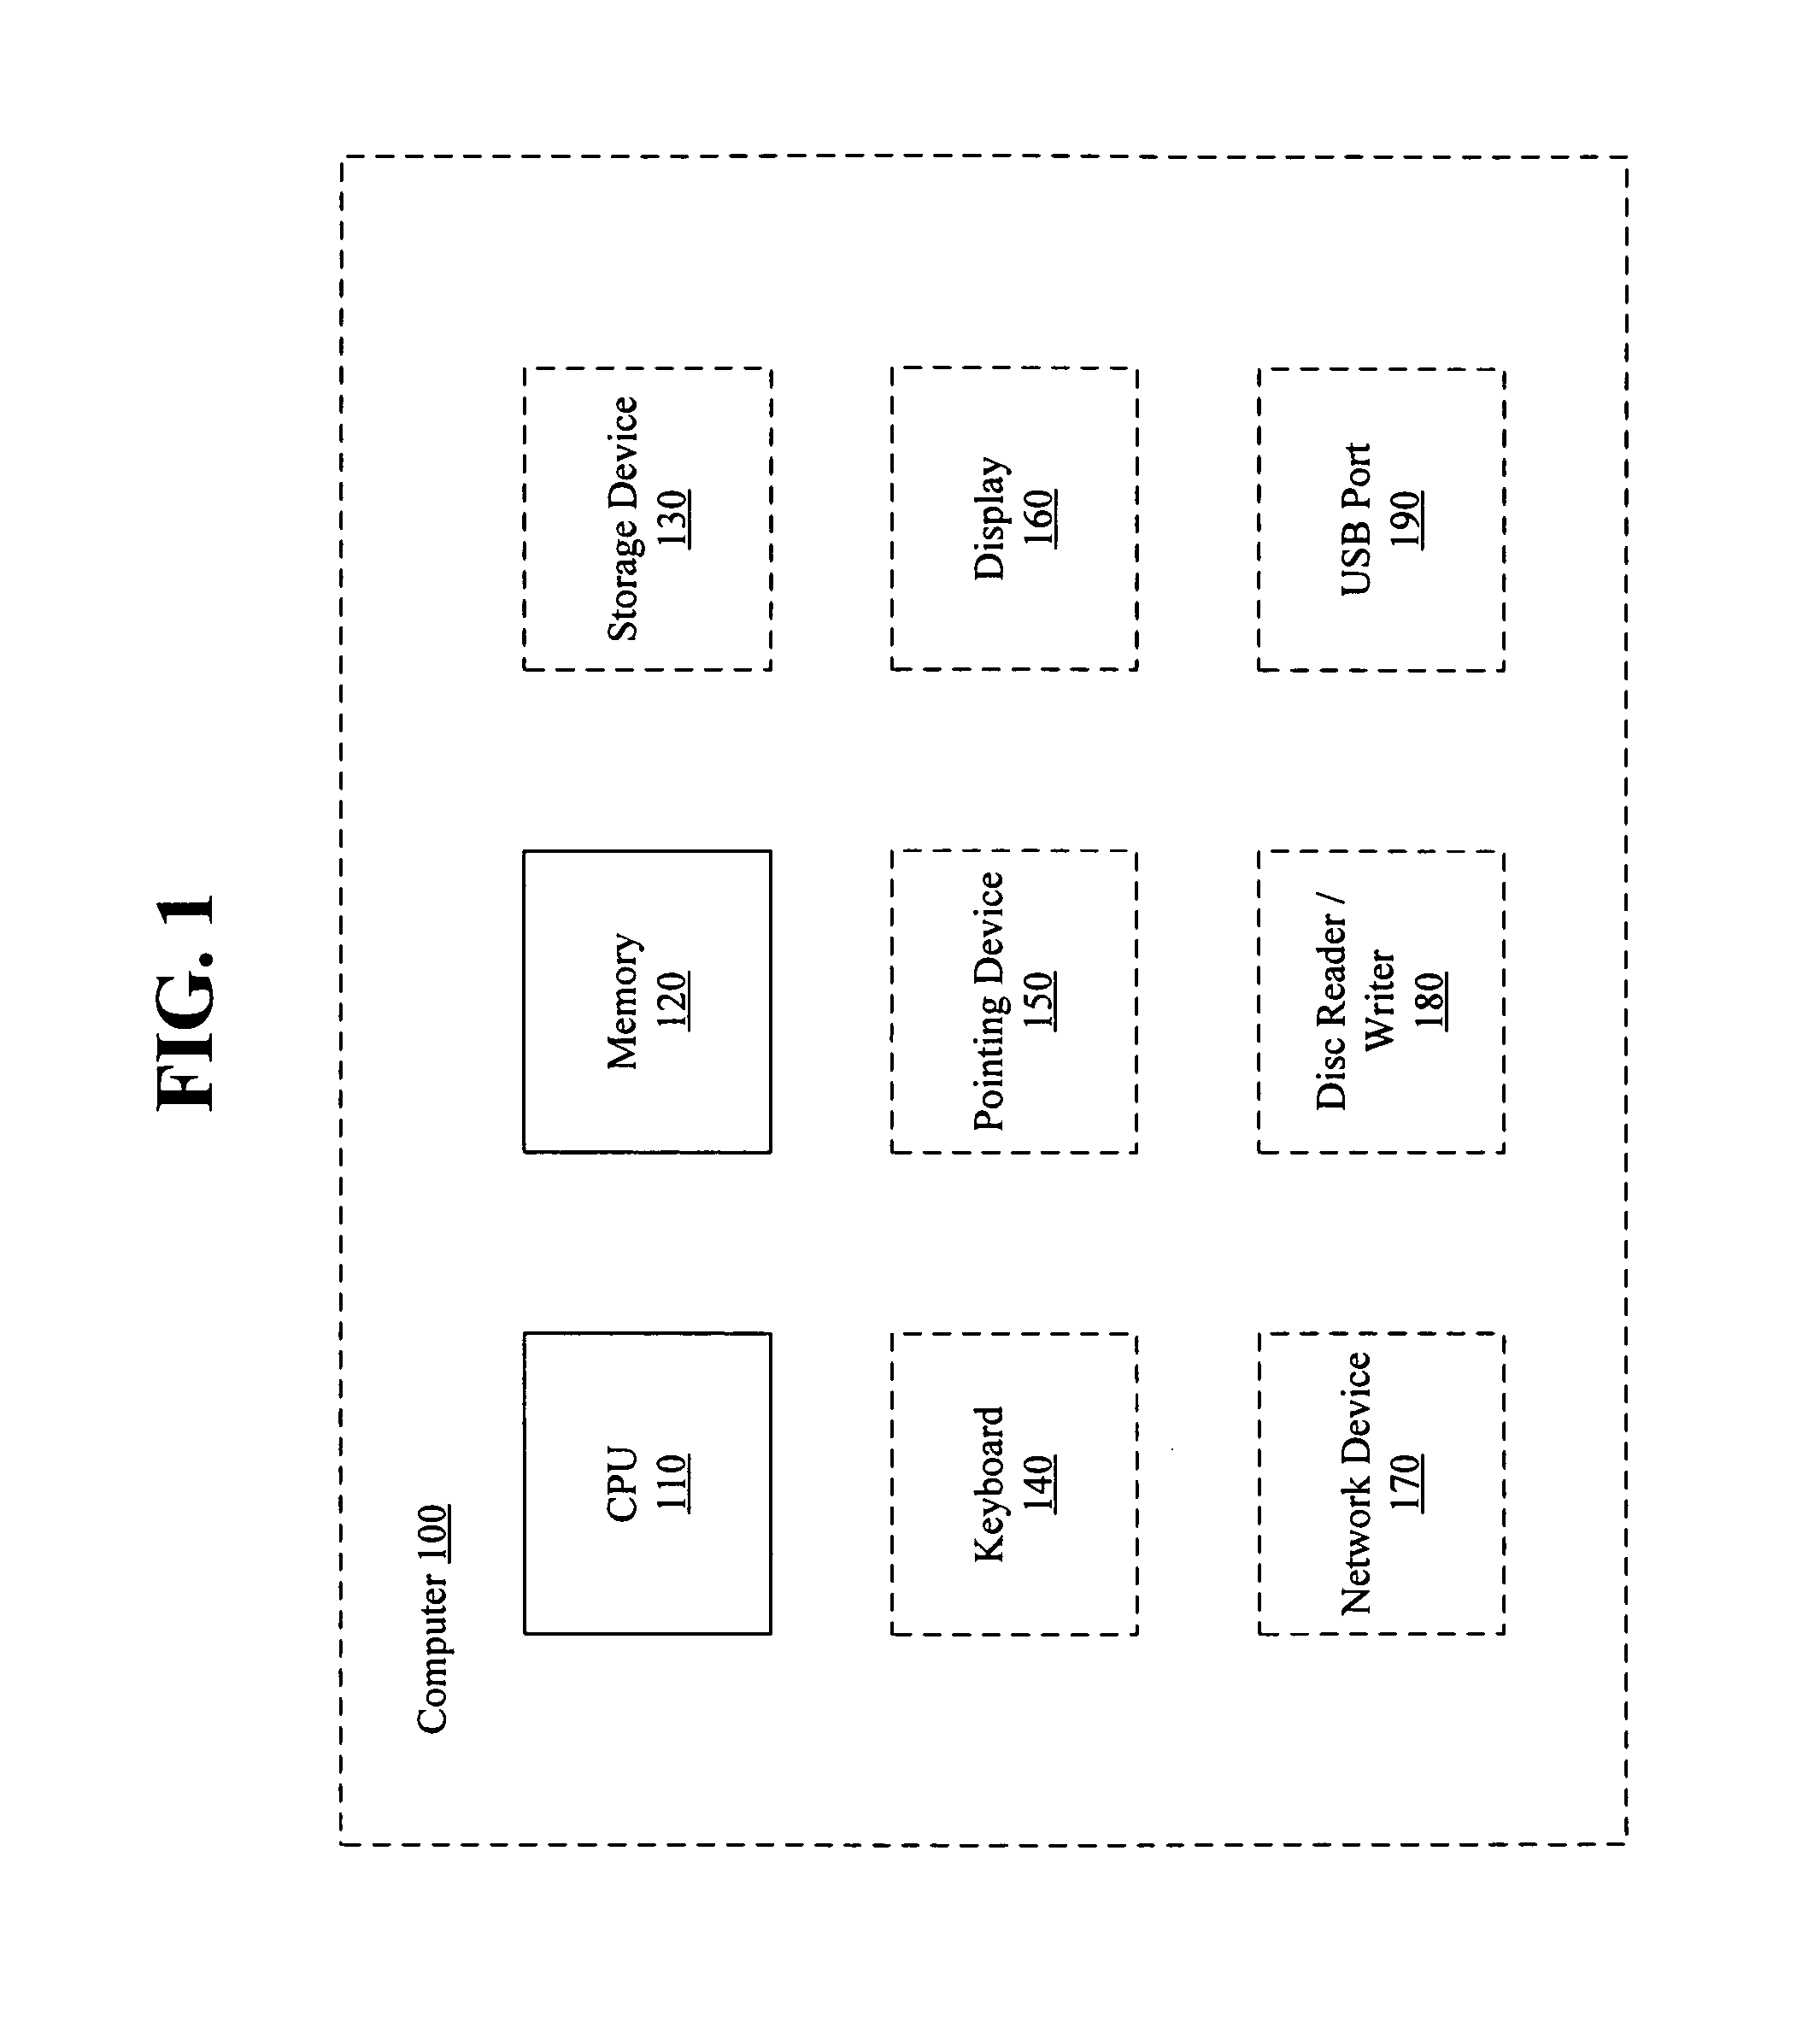 Incident tracking systems and methods